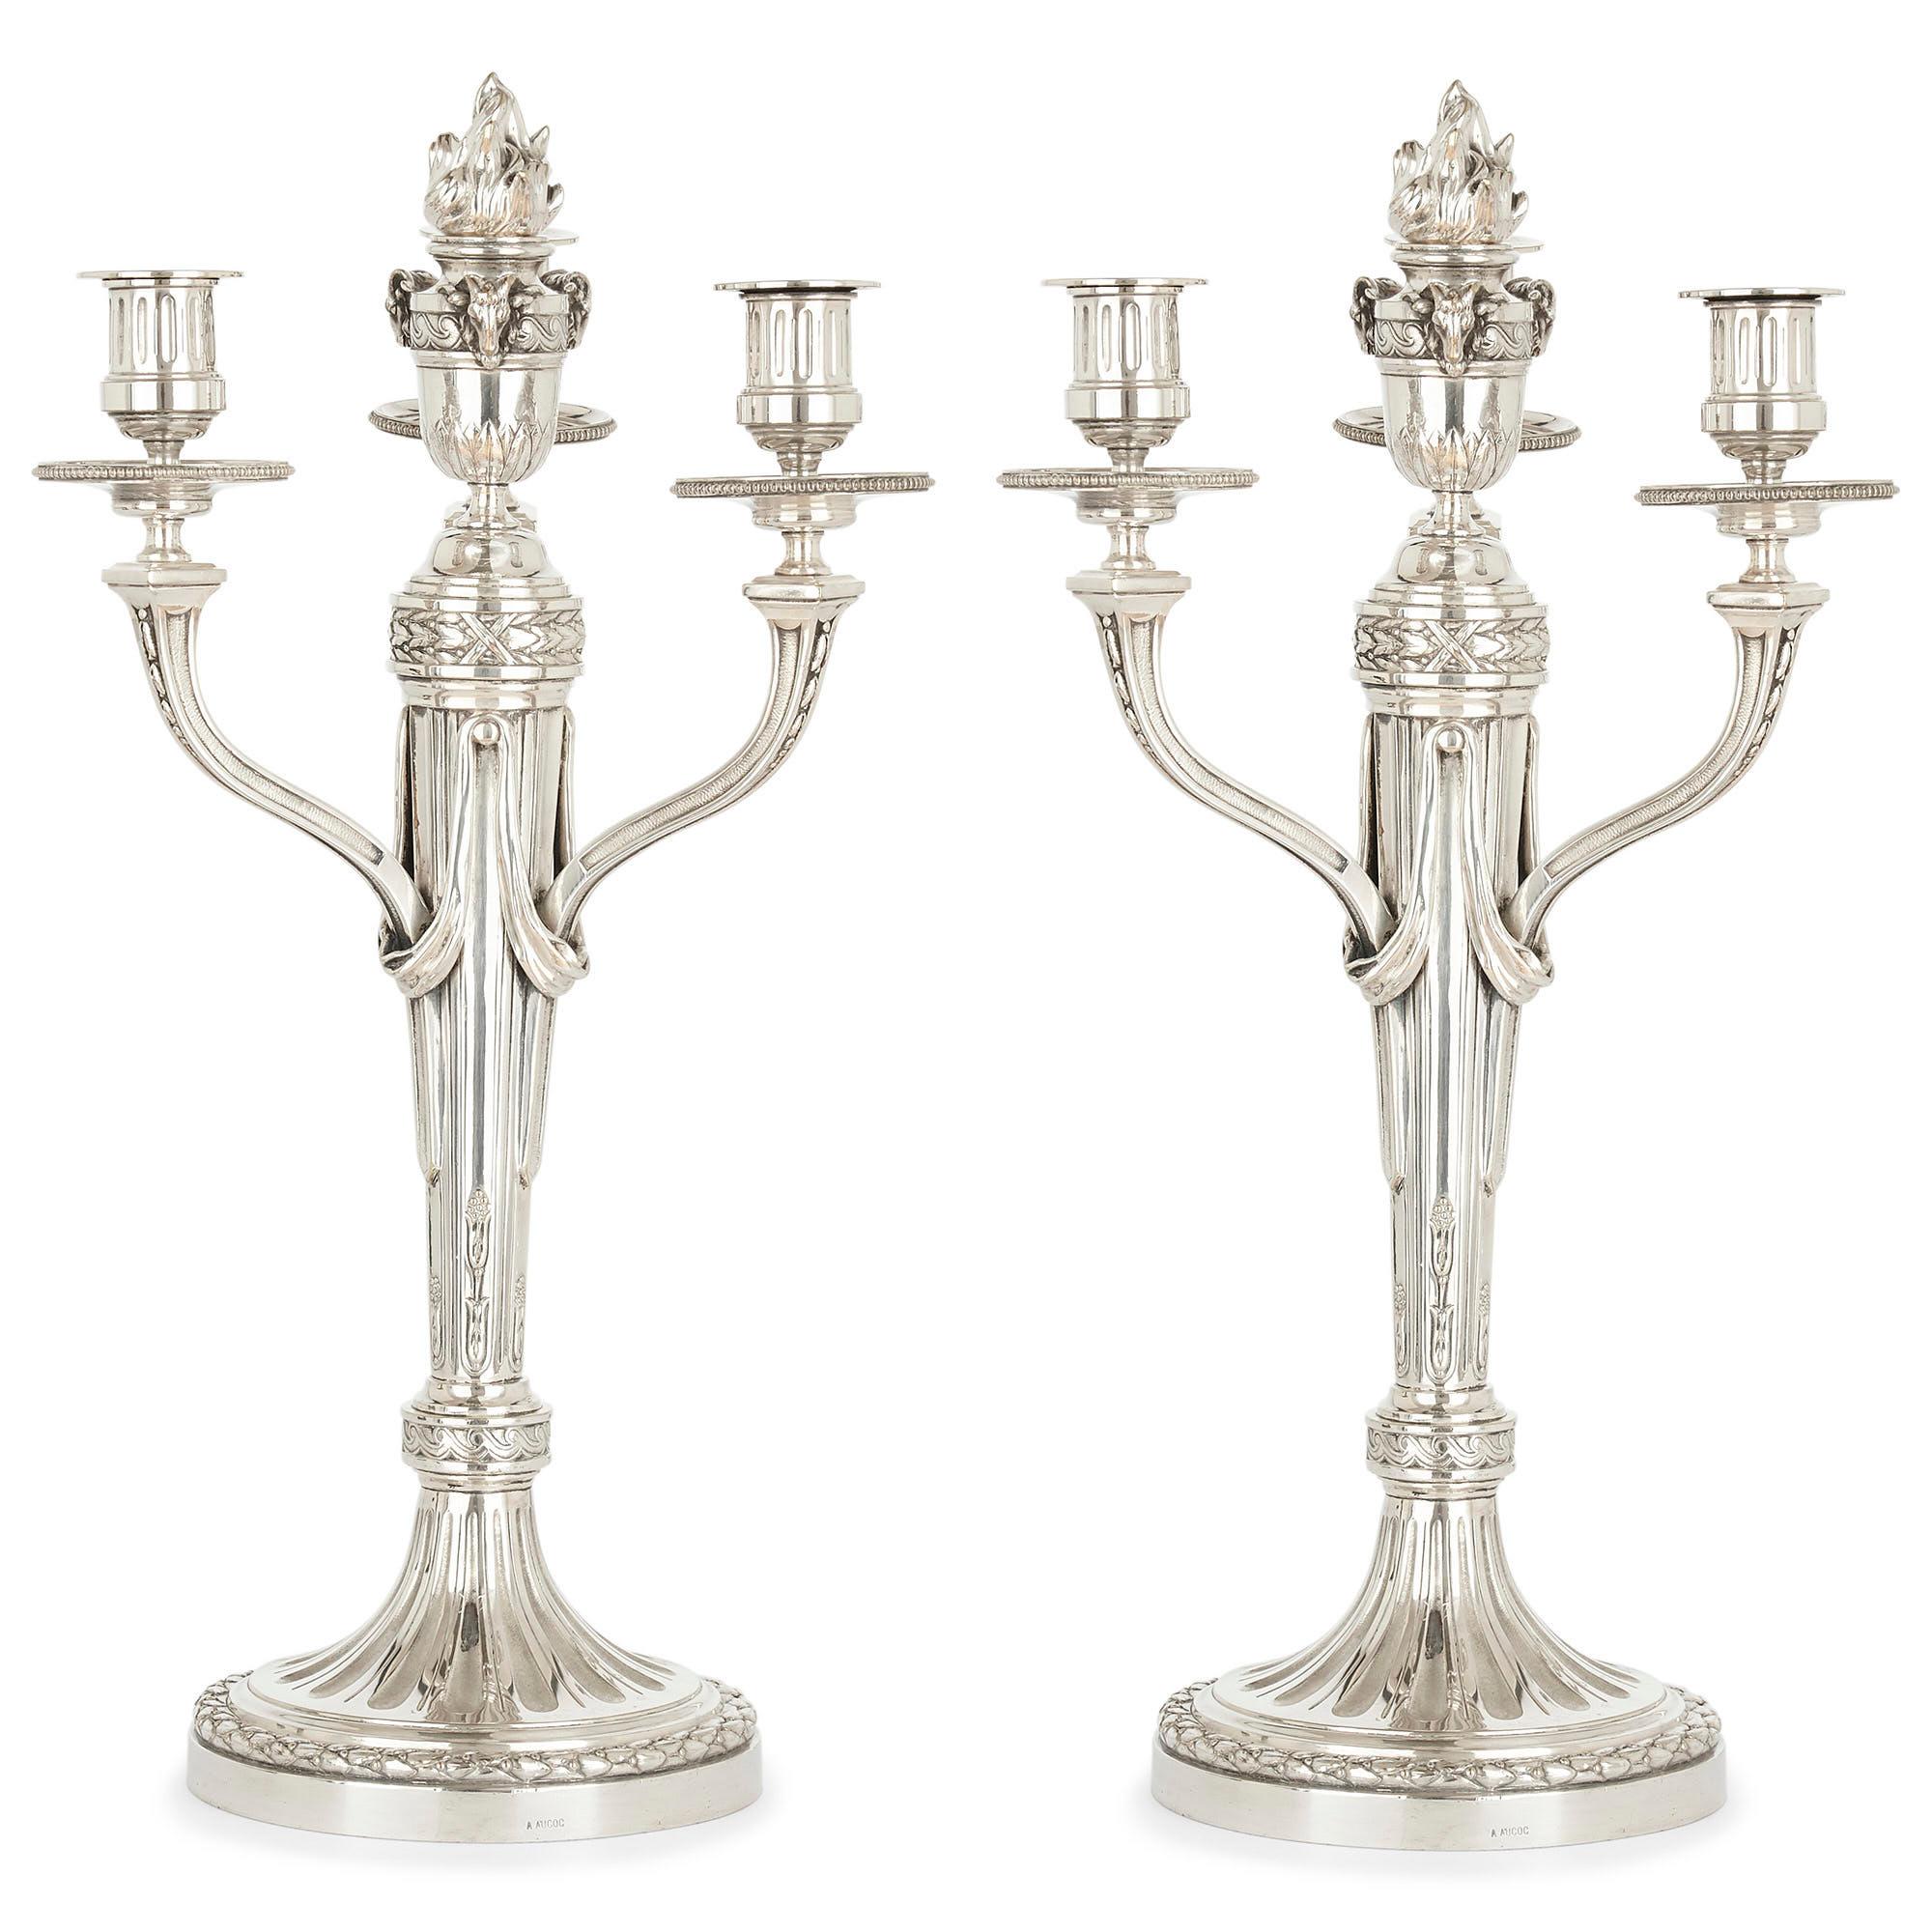 Pair of Louis XVI style silvered bronze table candelabra by André Aucoc
French, circa 1900
Size: Height 45cm, diameter 23cm

This beautiful pair of silvered bronze candelabra was made circa 1900 by André Aucoc, a leading French silversmith of